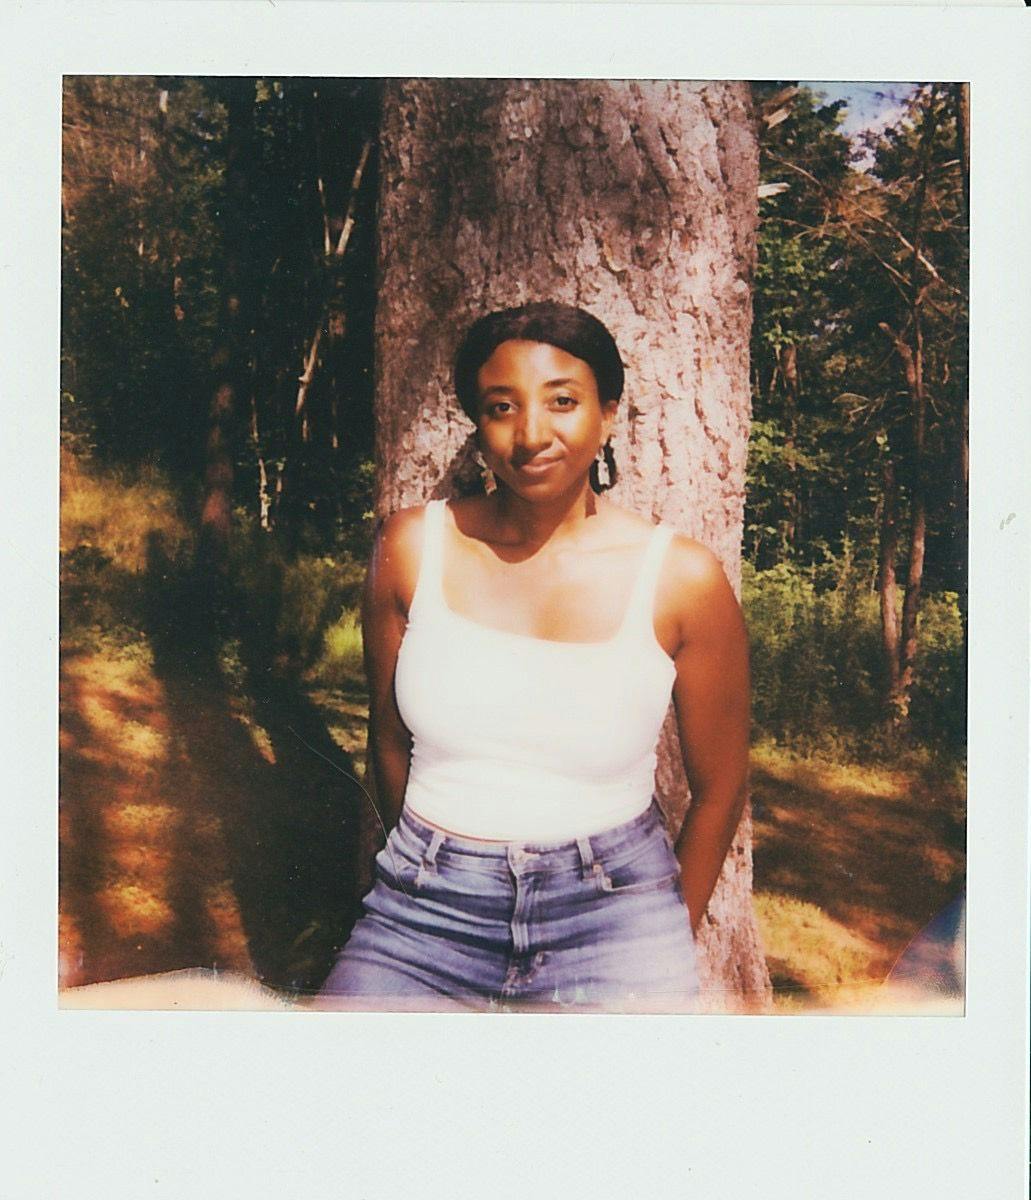 A polaroid photograph of a black woman with a center-part and low ponytail wearing a white tank top and jeans and leaning against a sun-dappled tree. The image is slightly blurry around the edges.